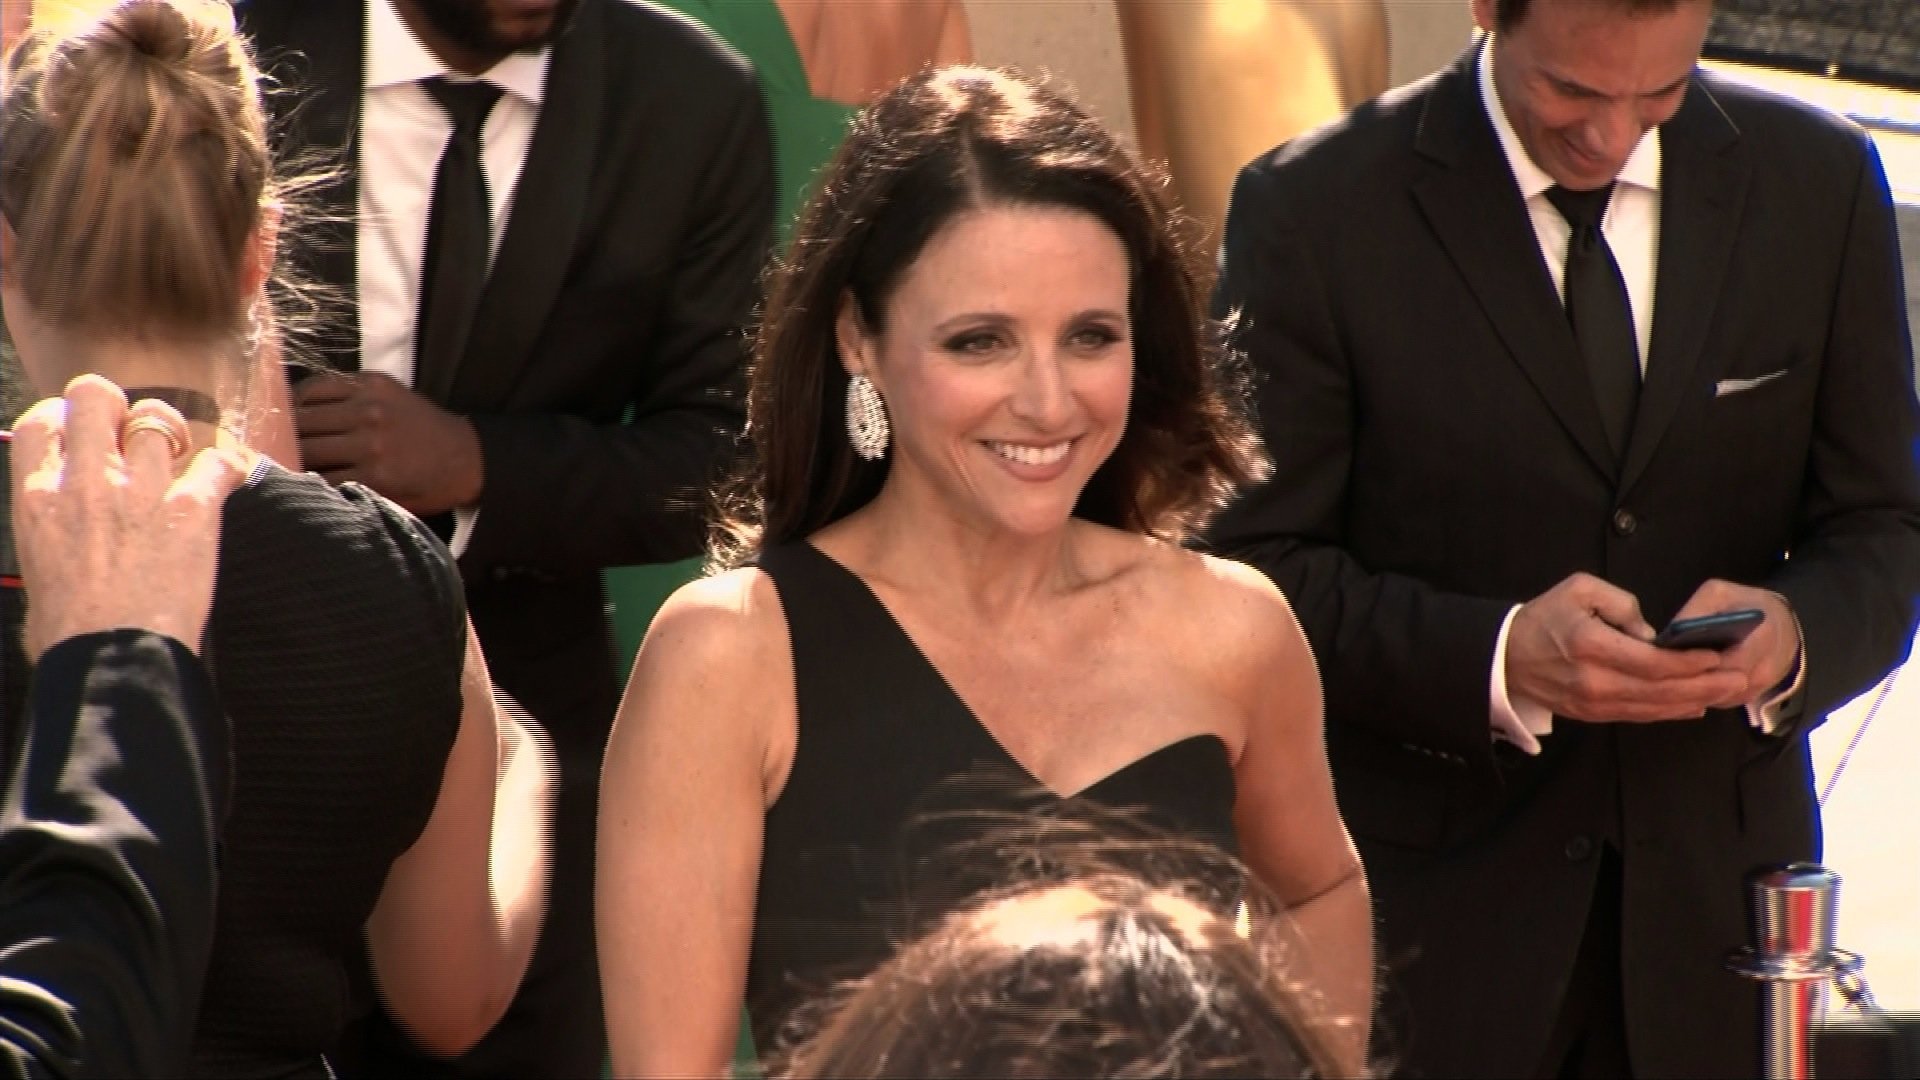 Julia Louis-Dreyfus on the red carpet of the 67th Emmy Awards in Los Angeles, September 20, 2015.